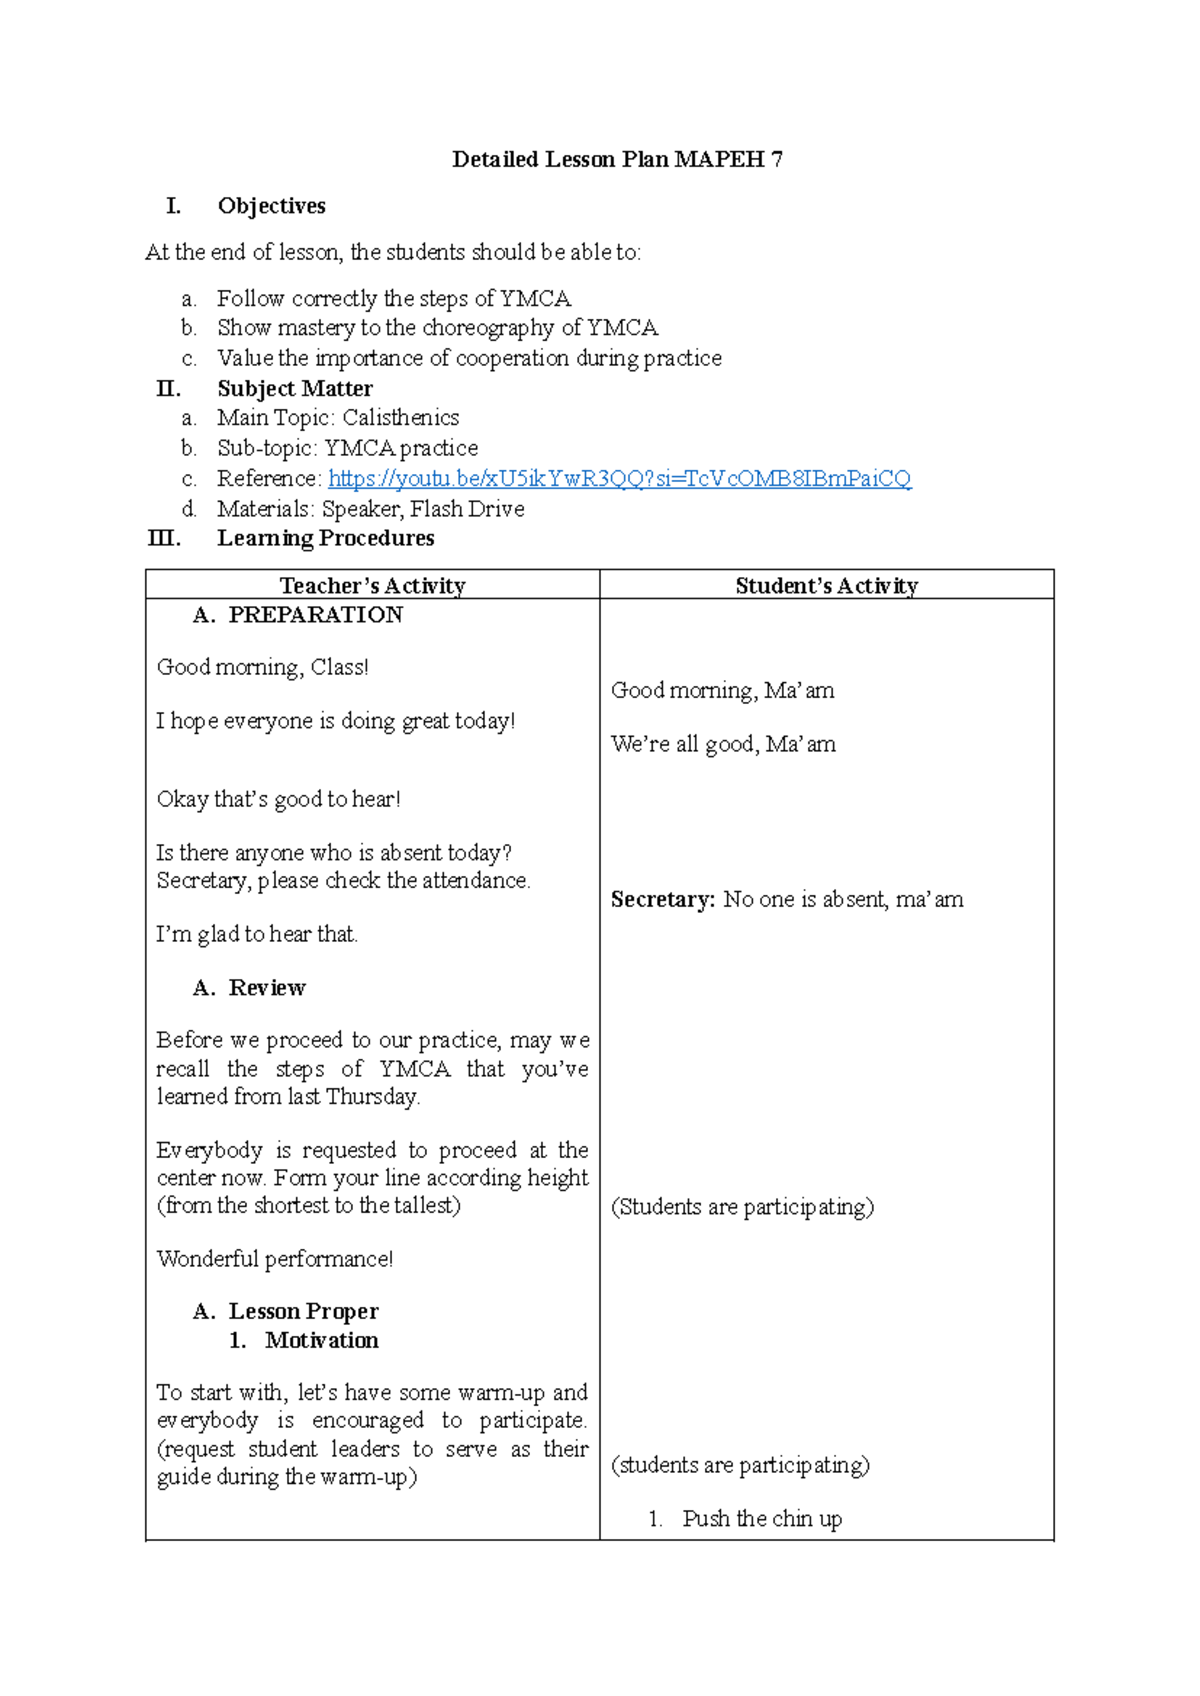 Dlp Lussoc 1 Lesson Plan Detailed Lesson Plan Mapeh 7 I Objectives At The End Of Lesson 0141